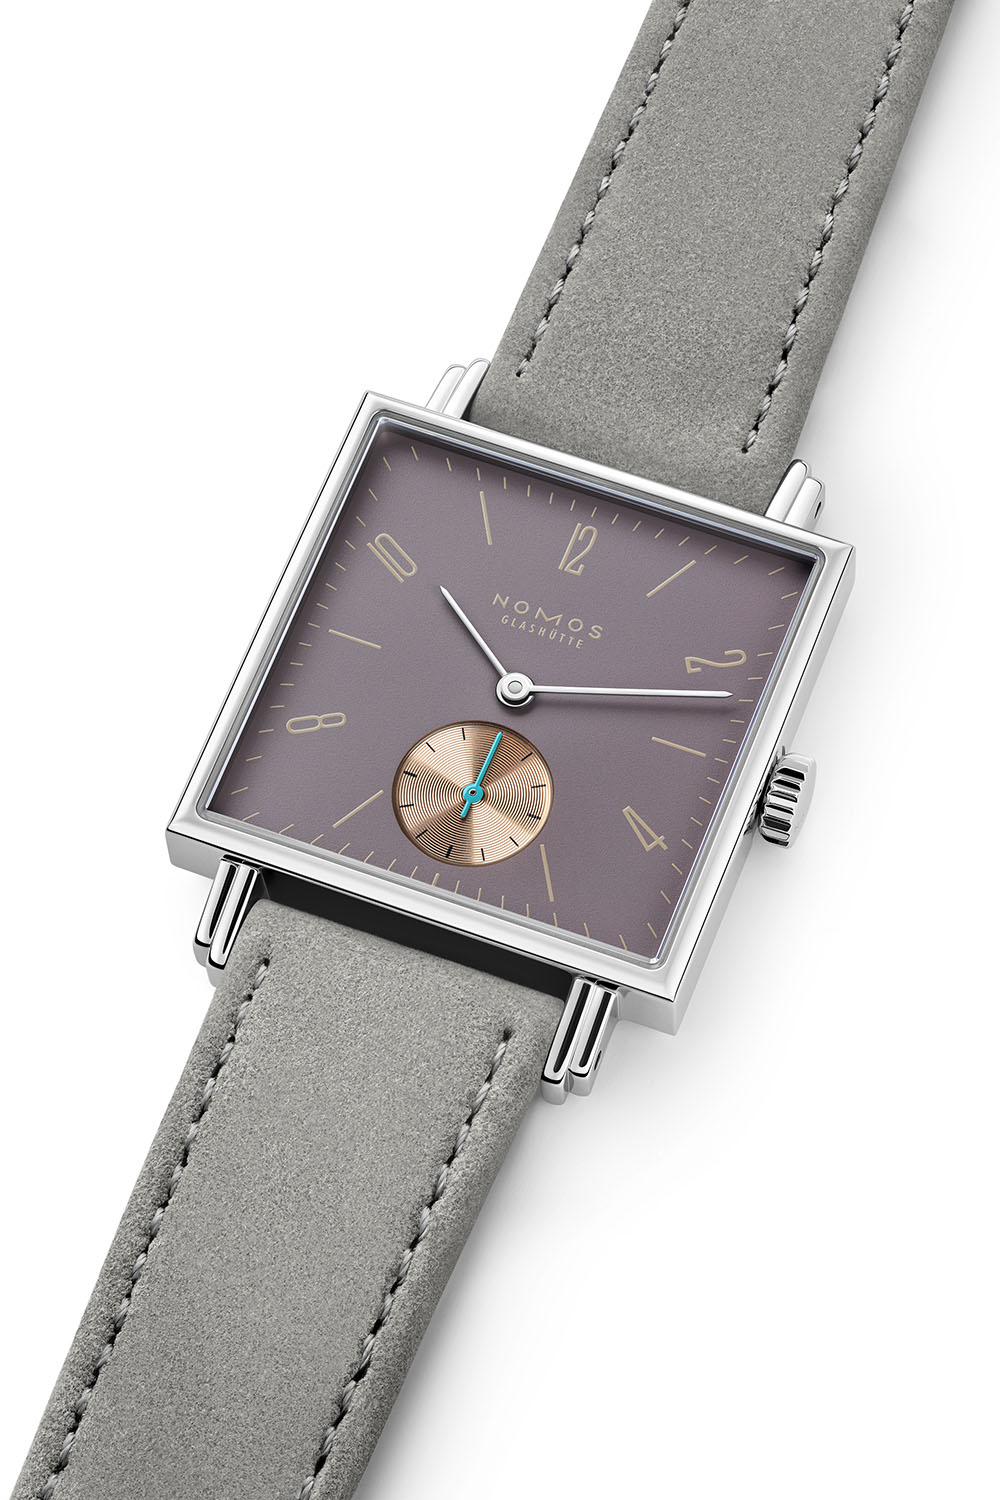 New Nomos Tetra Hand-Wound Alpha Square Watch Colours Easter 2023 - 4